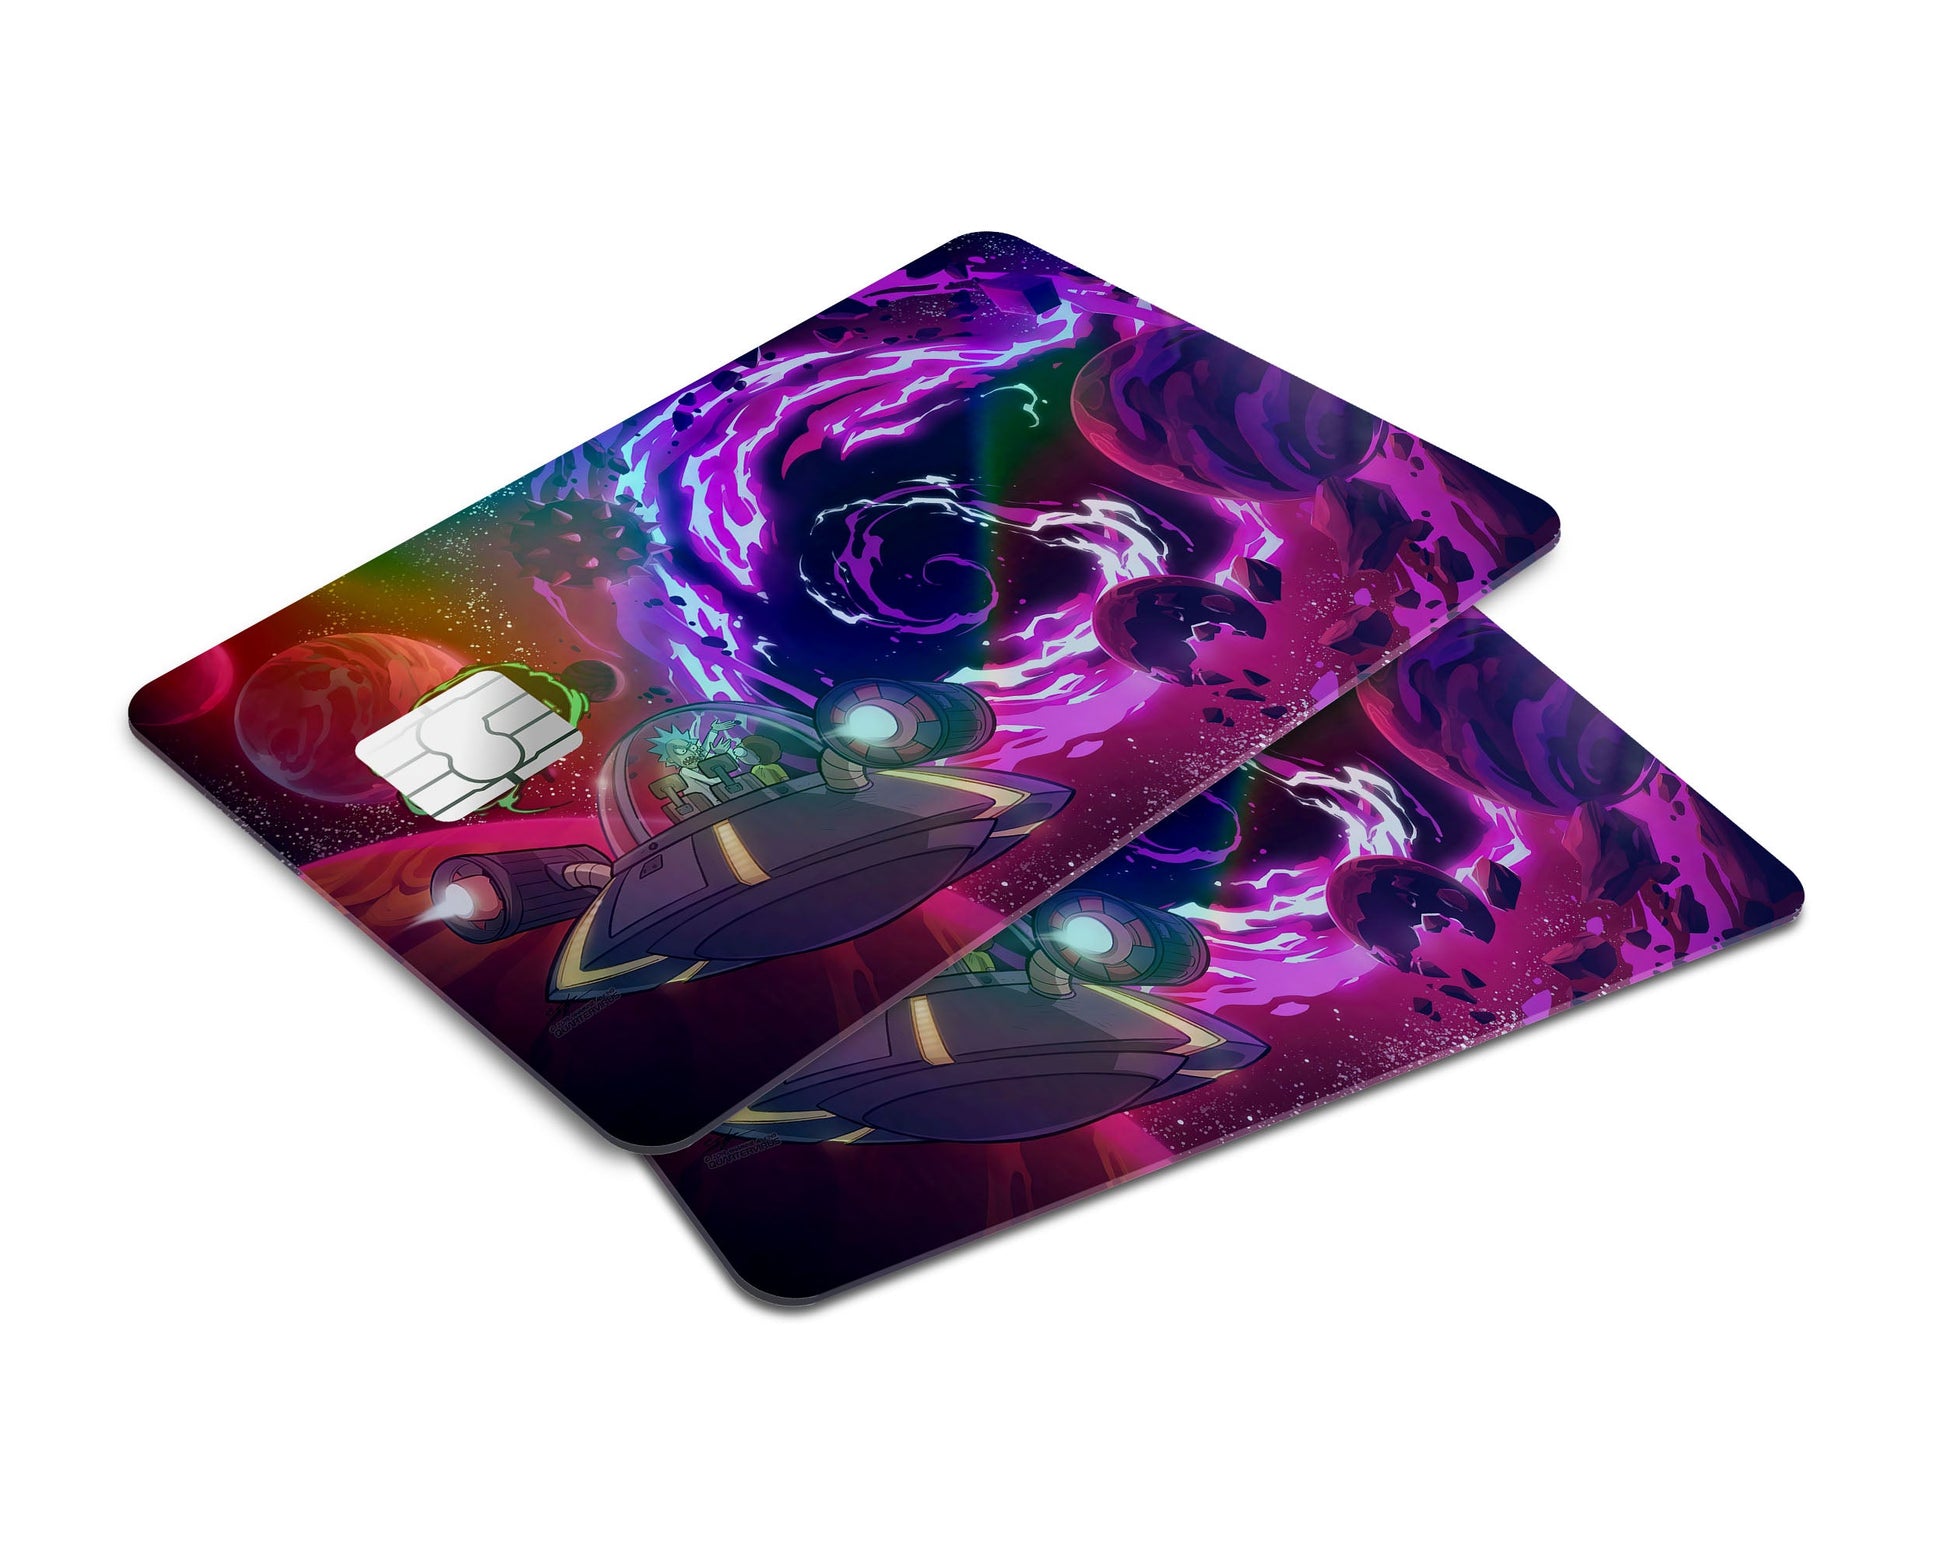 Anime Town Creations Holographic Credit Card Rick and Morty Space Travel Purple Window Skins - Anime Rick and Morty Holographic Credit Card Skin